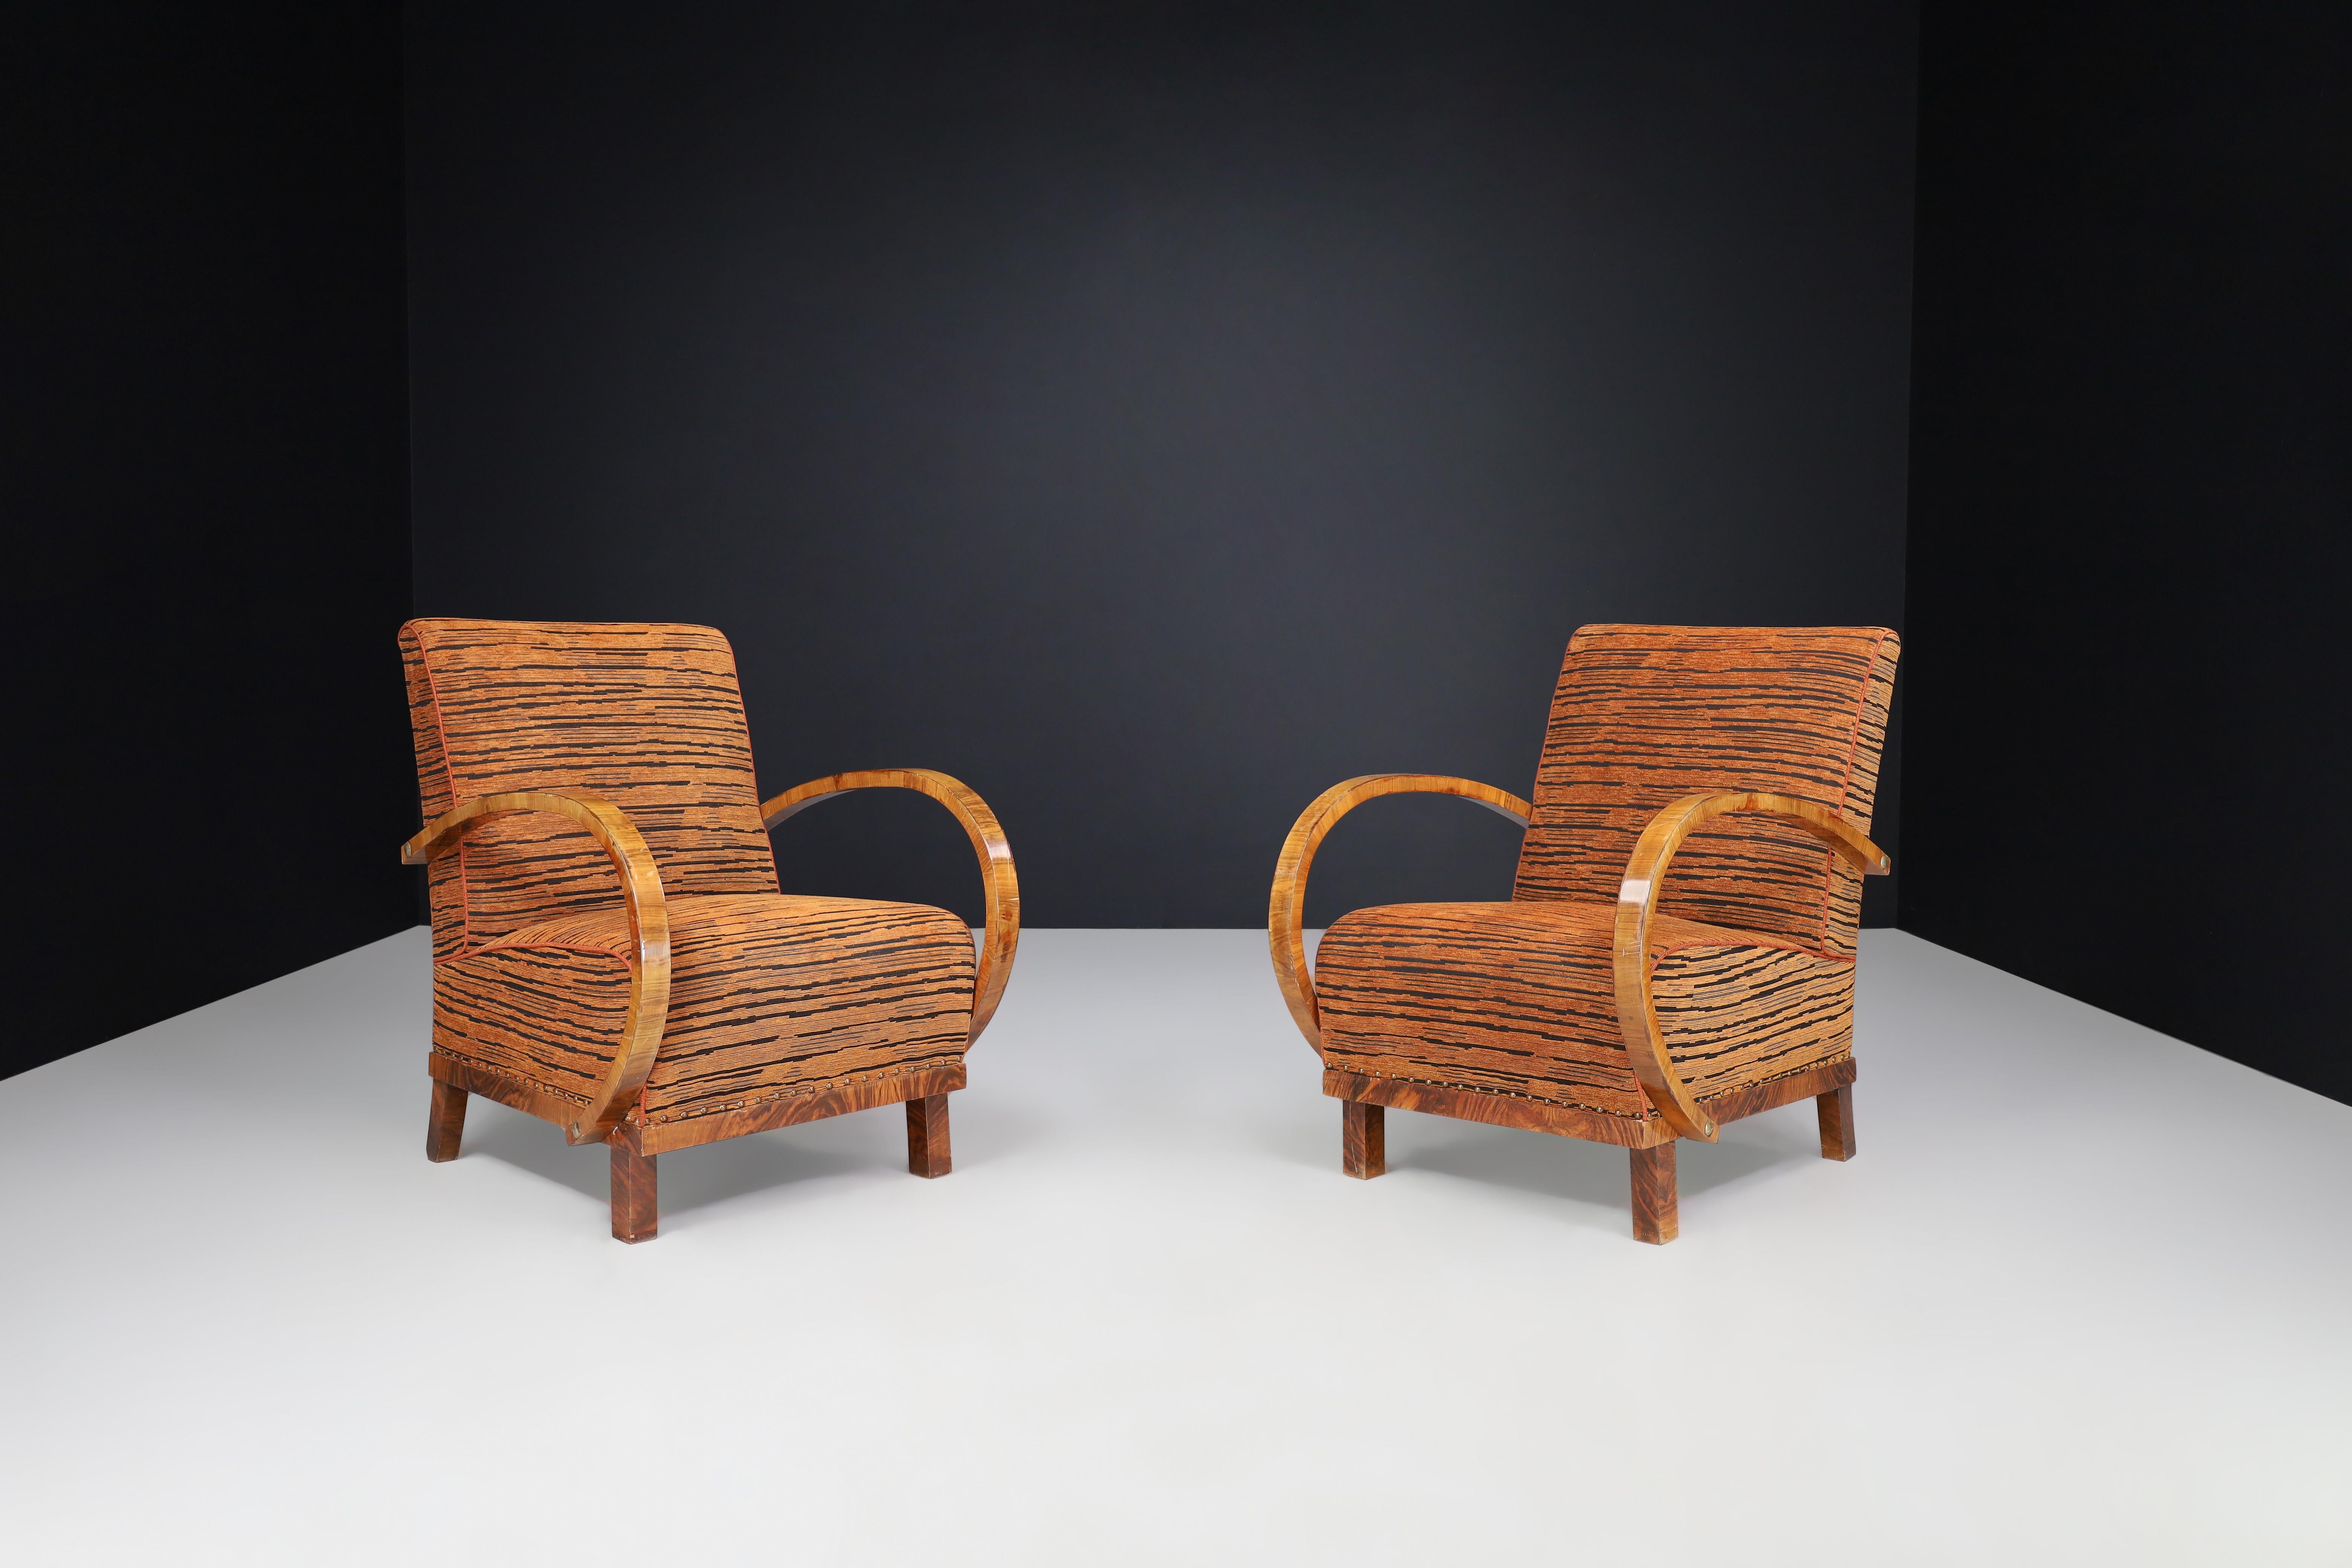 20th Century Art Deco Armchairs in Walnut in New Upholstery, Austria 1930s For Sale